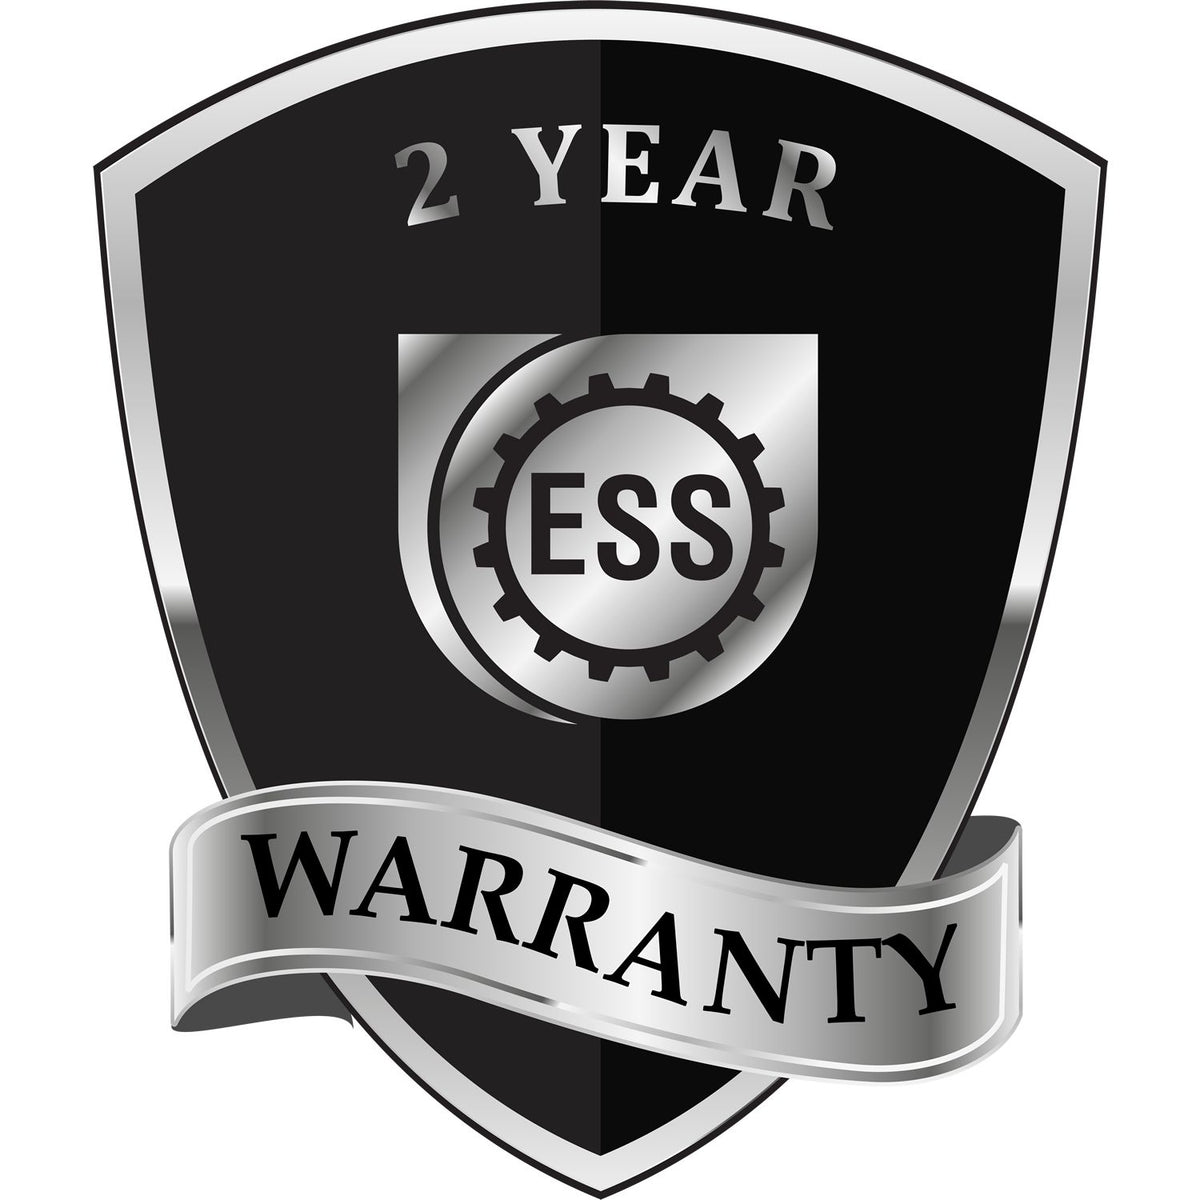 A badge or emblem showing a warranty icon for the Handheld Georgia Land Surveyor Seal